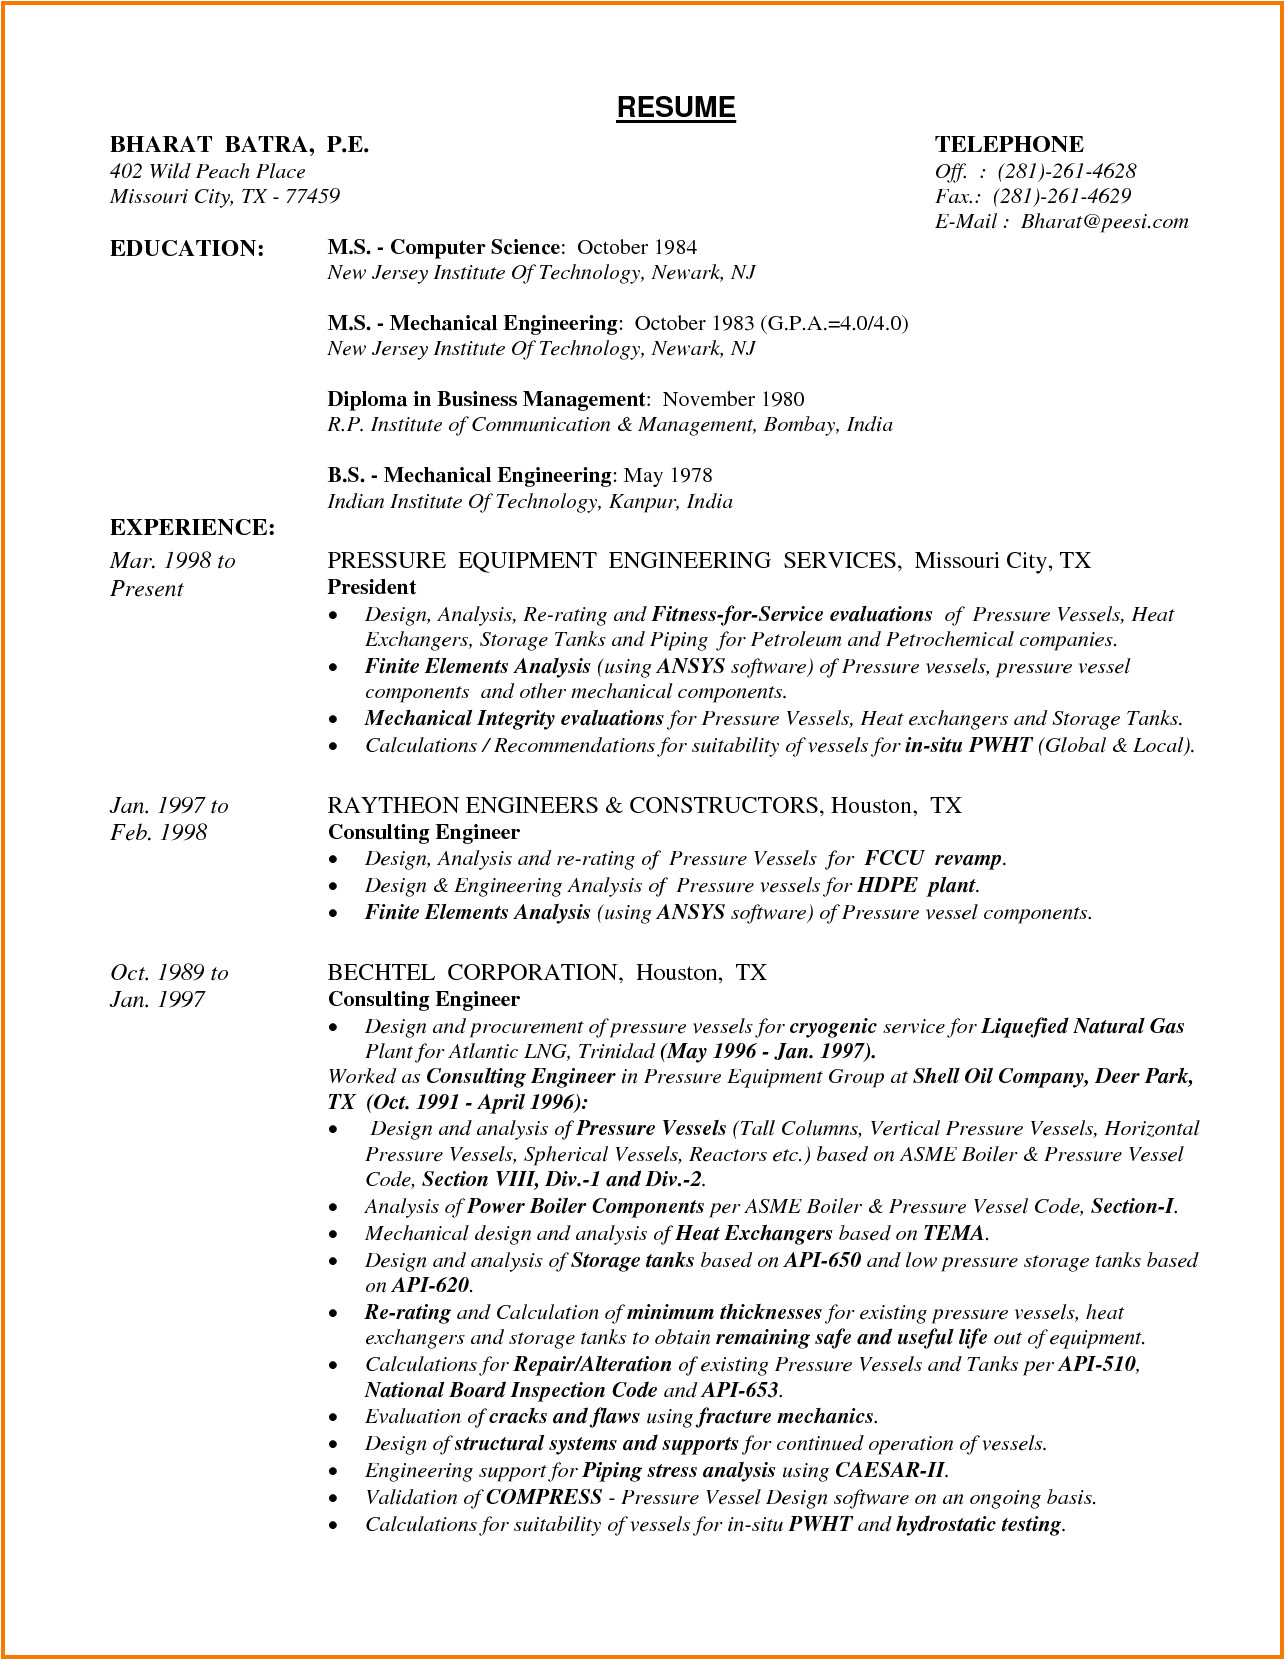 Resume Samples For Experienced Mechanical Engineers 7 Experienced Mechanical Engineer Resume Financial Of Resume Samples For Experienced Mechanical Engineers 1 